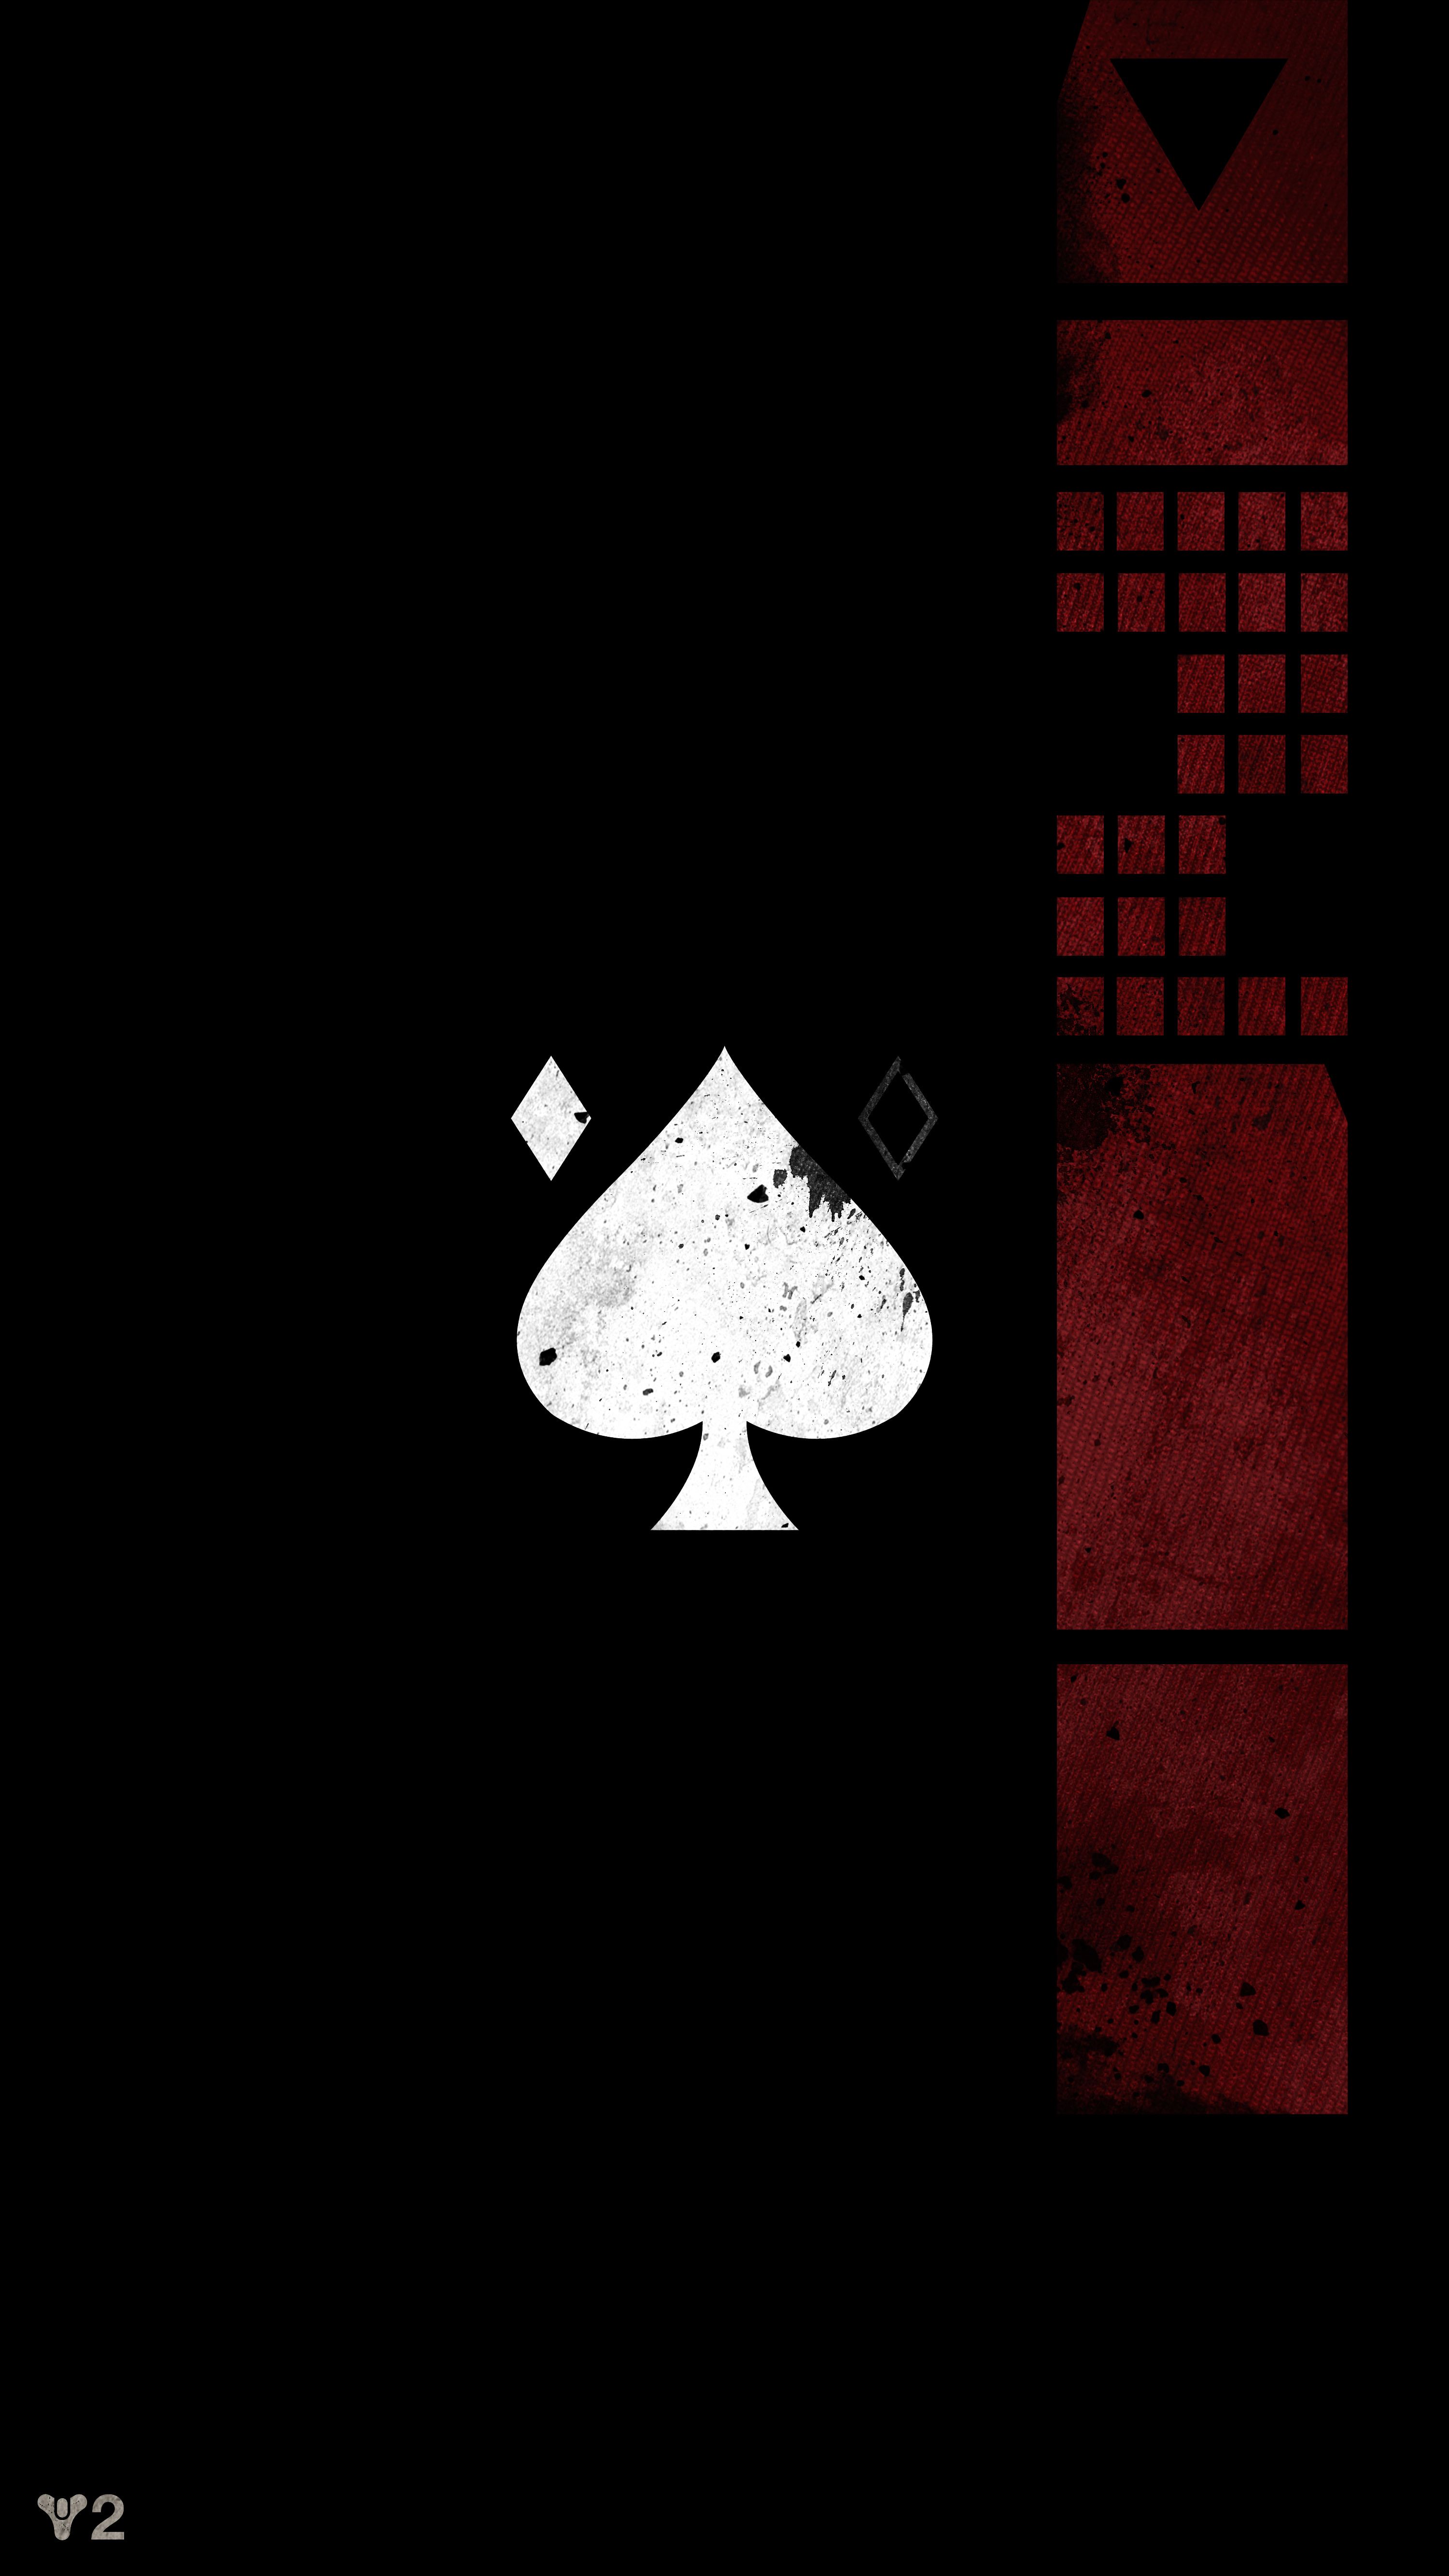 Ace of Spades Emblem Mobile Wallpaper submitted